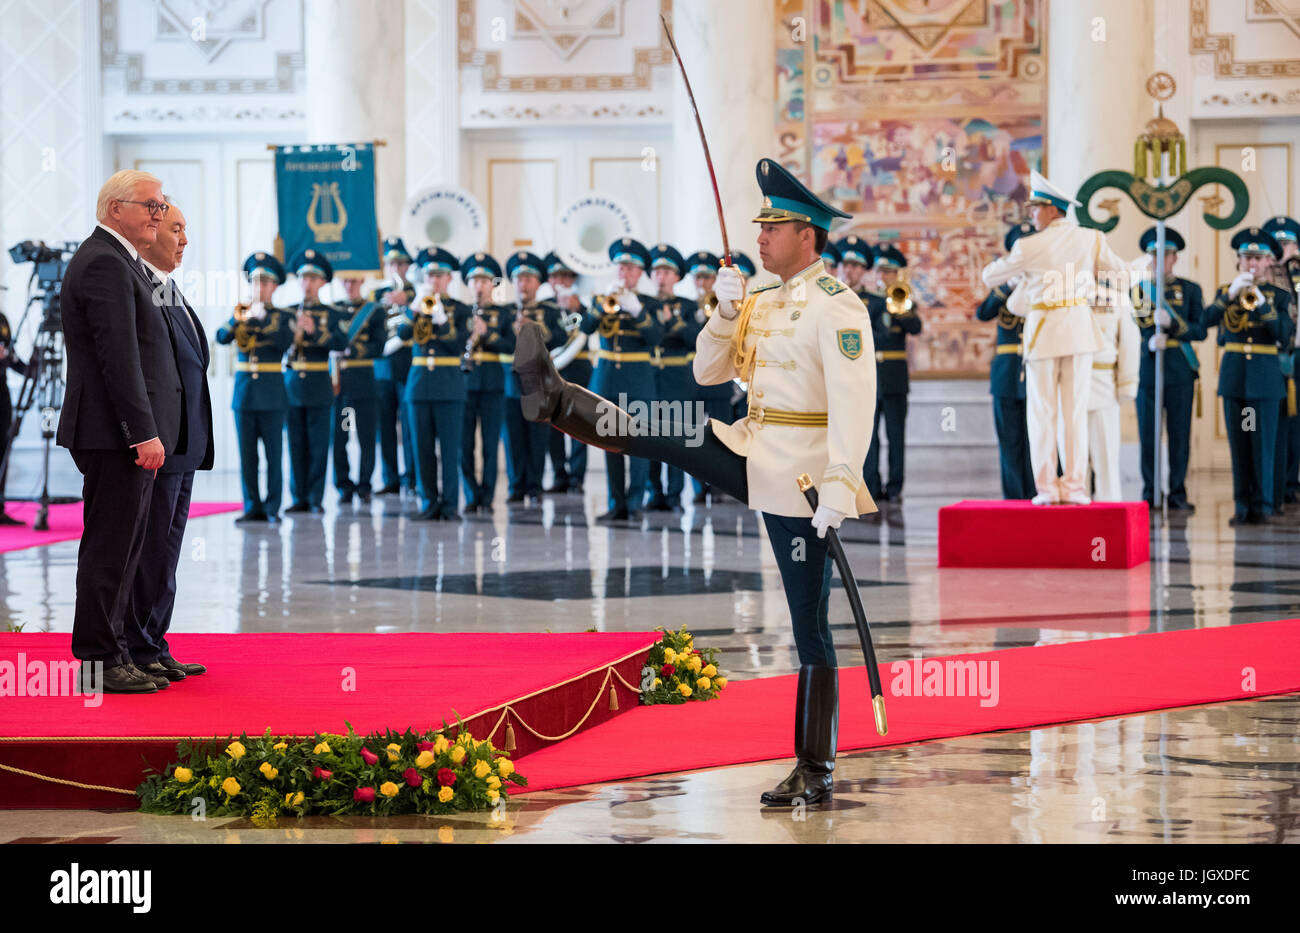 Astana, Kazakhstan. 12th July, 2017. dpatop - German President Frank-Walter Steinmeier (L) is welcomed by Kazakhstan's President Nursultan Nazarbayev with military honours at the Presidential Palace in Astana, Kazakhstan, 12 July 2017. The main purpose of Steinmeier and his wife's three-day-visit to Kazakhstan is the World's fair Expo 2017 in the capital Astana. Photo: Bernd von Jutrczenka/dpa/Alamy Live News Stock Photo